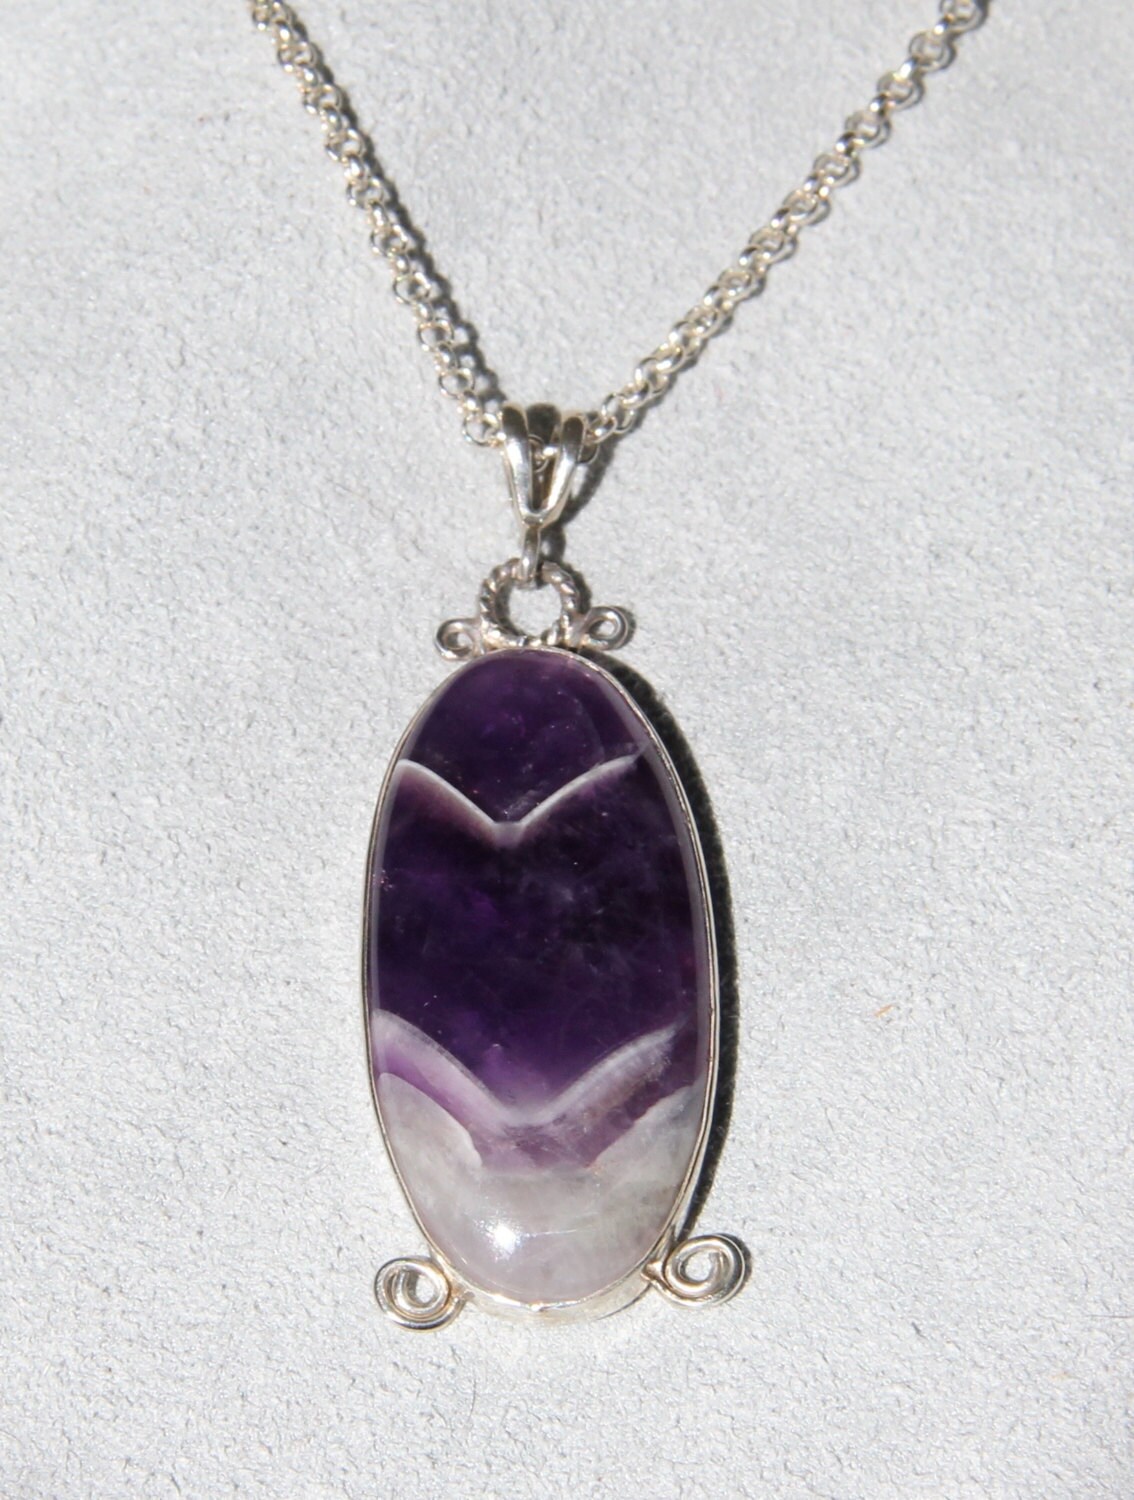 Chevron Banded Amethyst Pendant Necklace Sterling Silver - Etsy